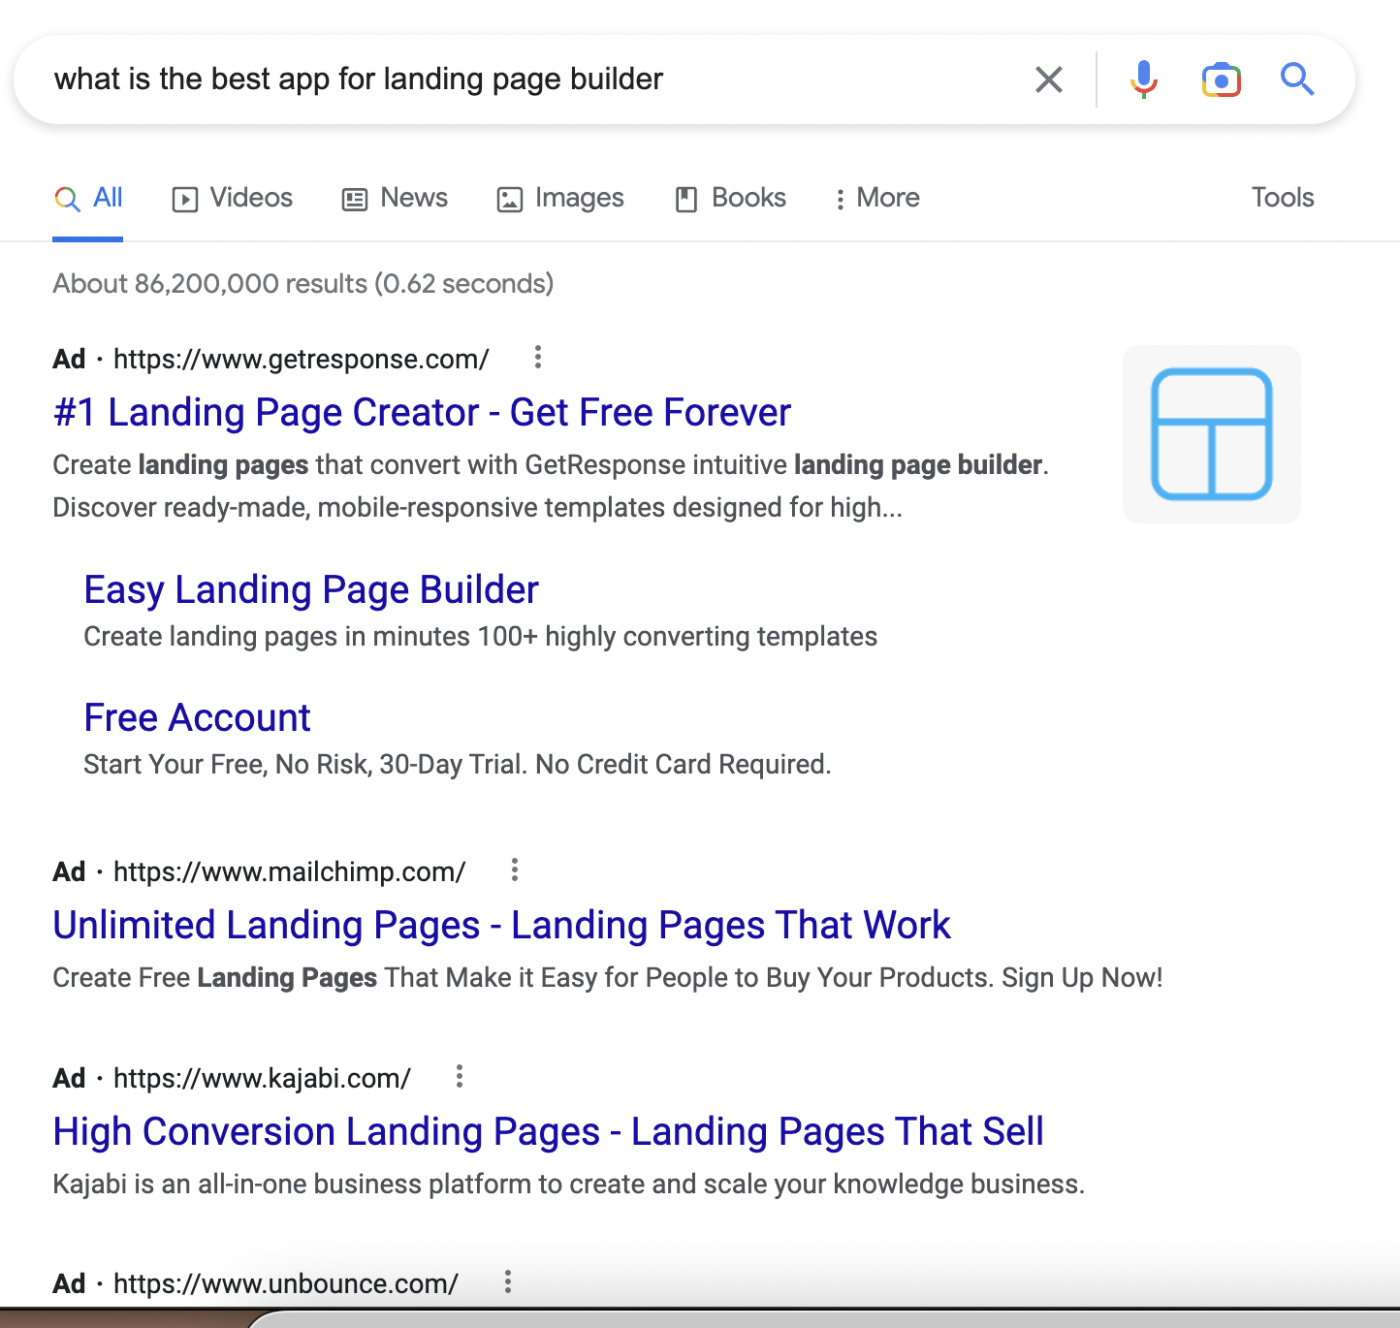 SERP for "what is the best app for landing page builder" (all ads)